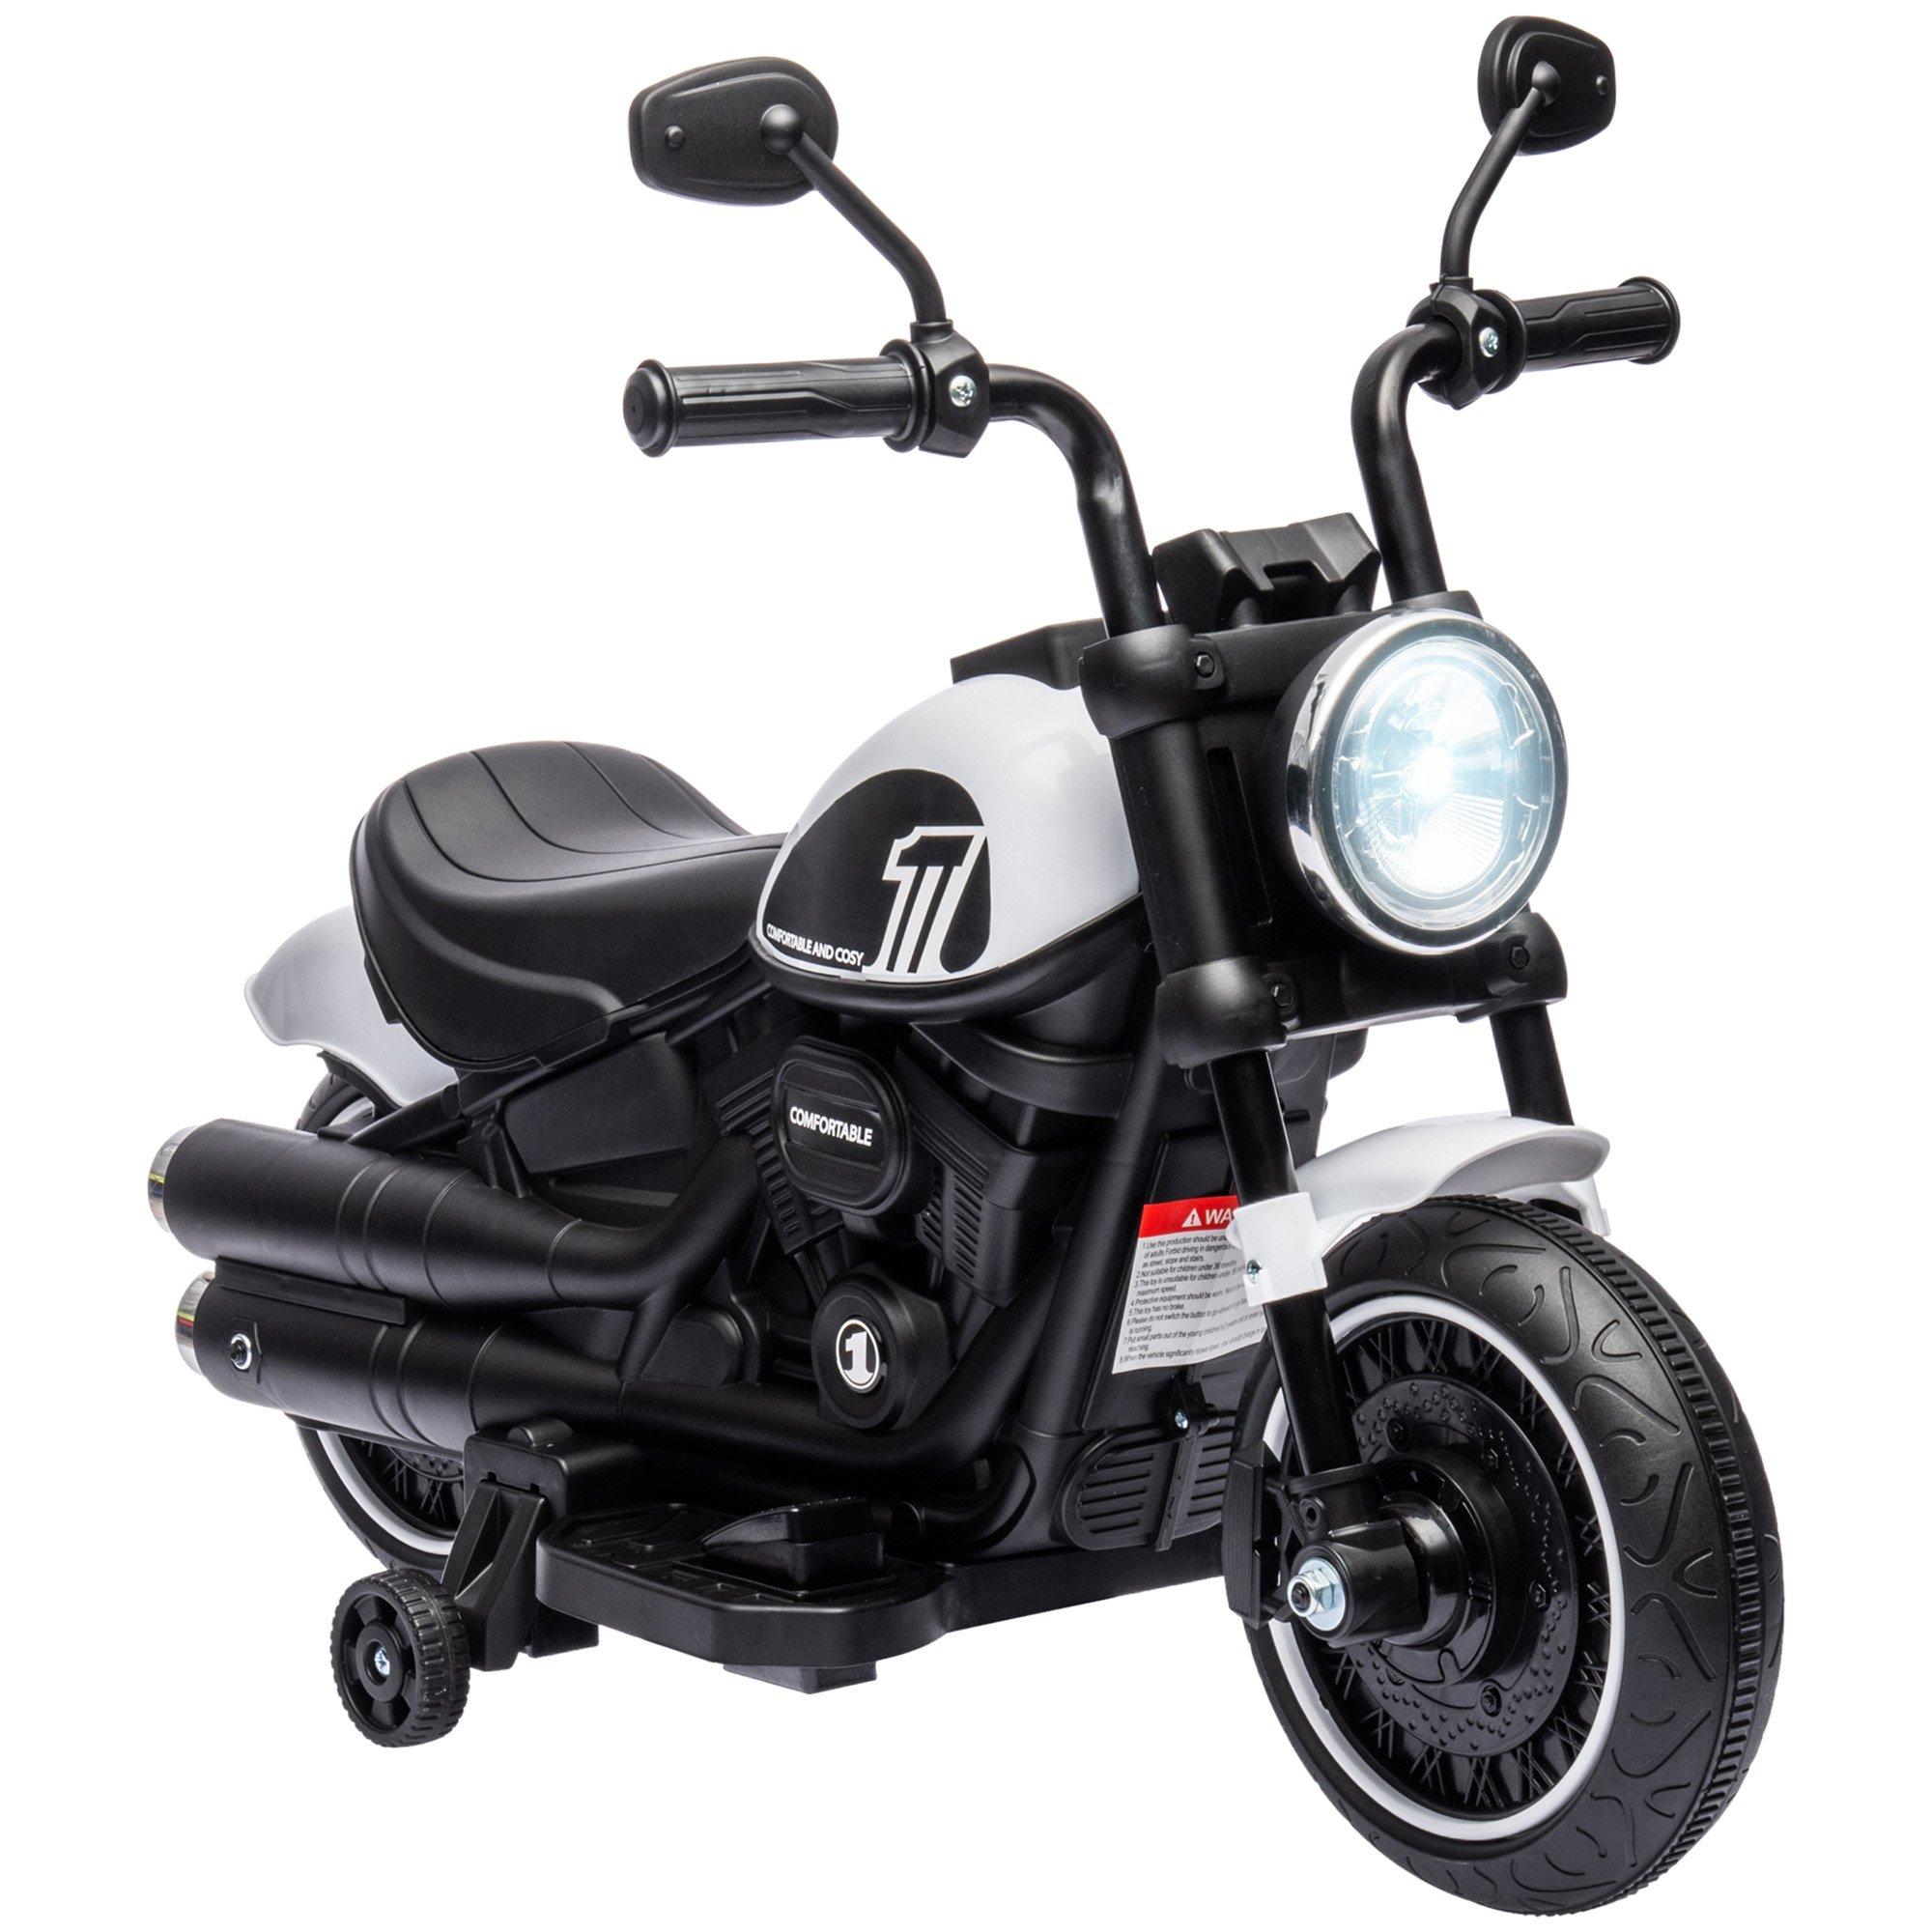 6V Electric Motorbike with Wheels, One-Button Start, Headlight